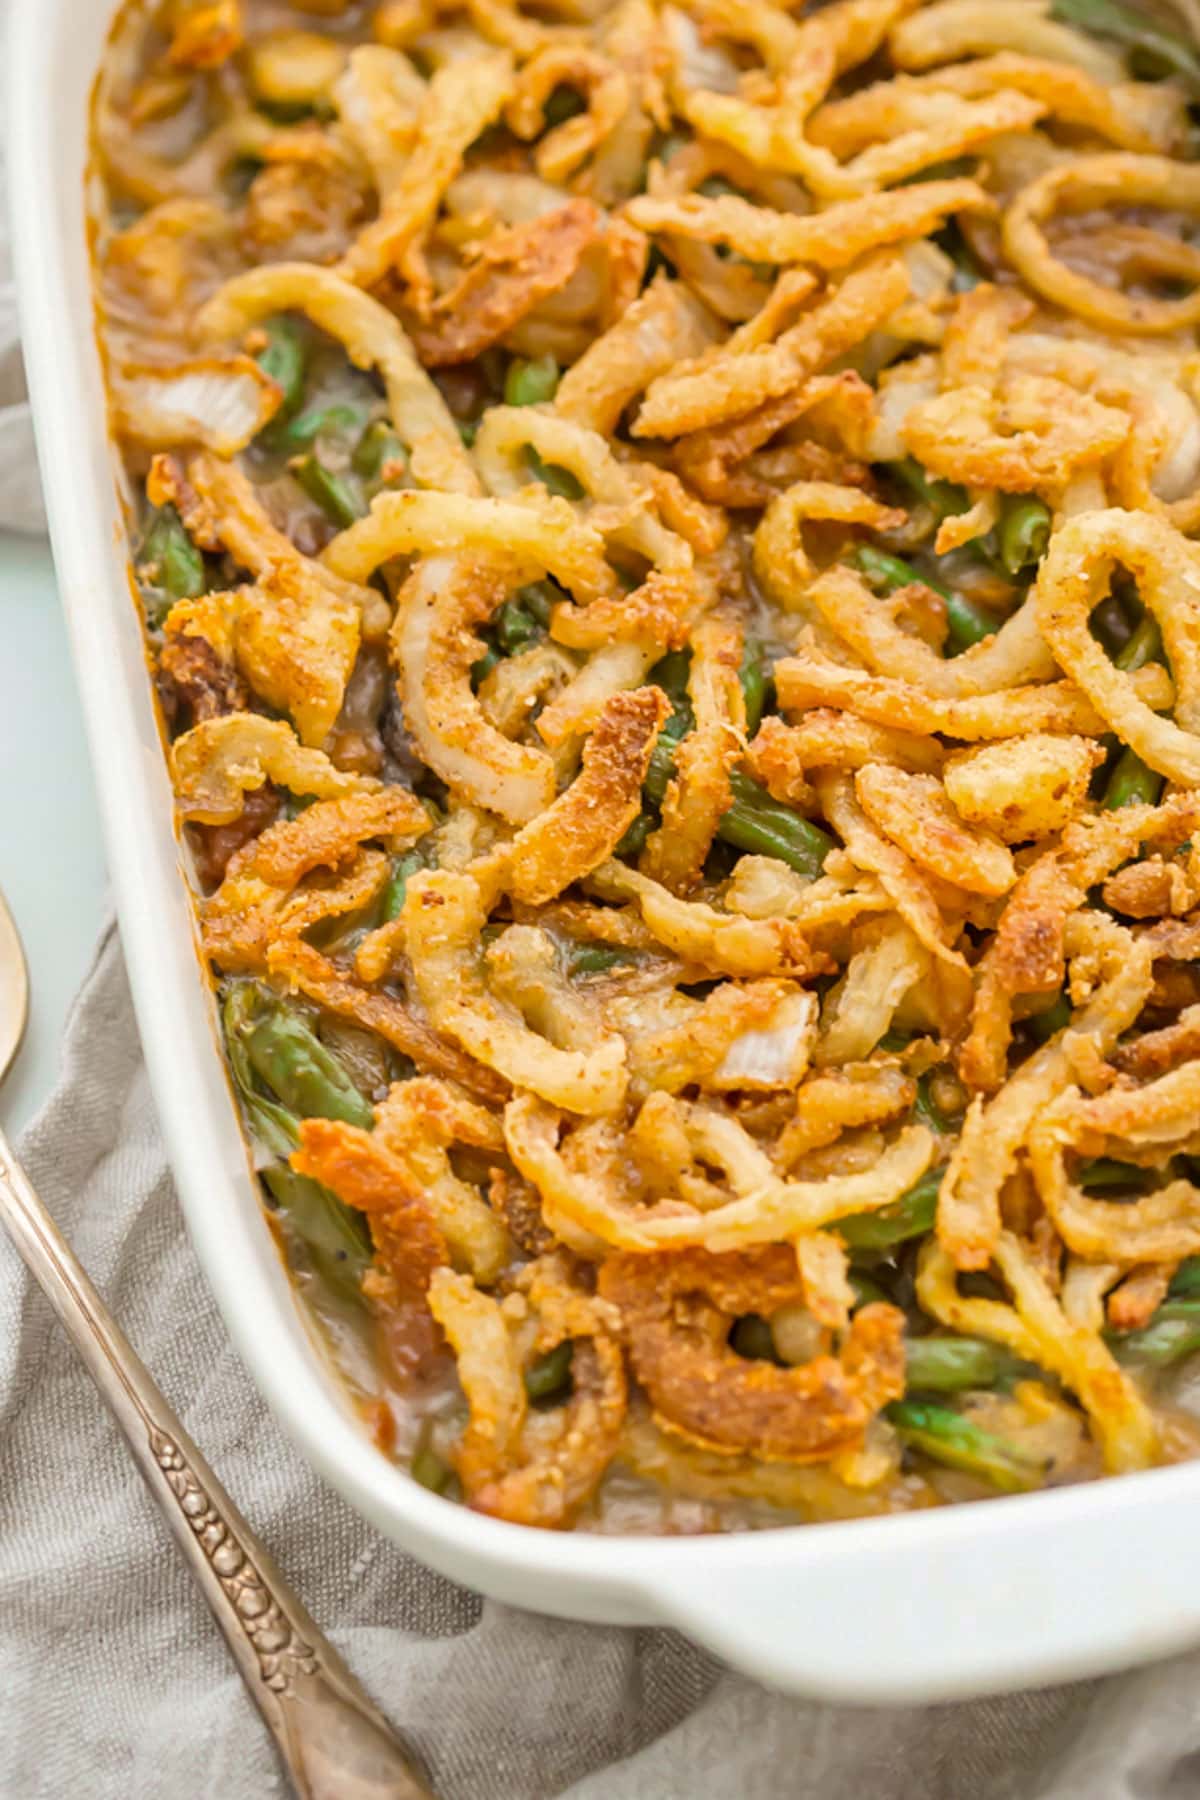 A large rectangular casserole dish holding a Whole30 green bean casserole topped with crispy onions.